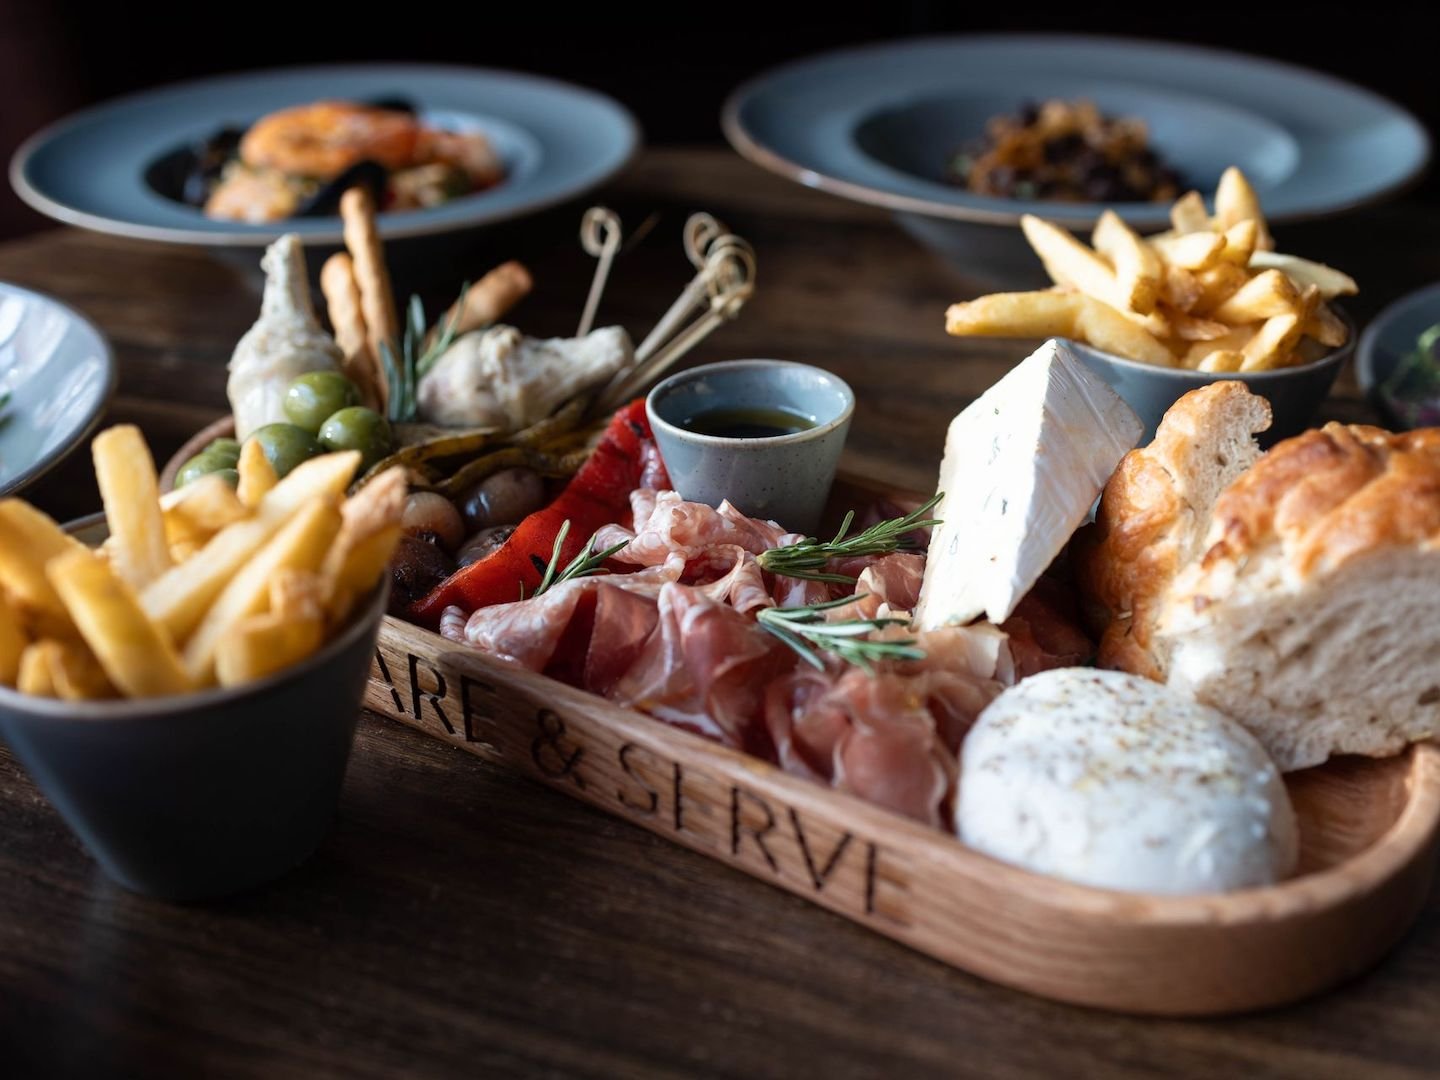 Sharing Boards are a perfect option for two.